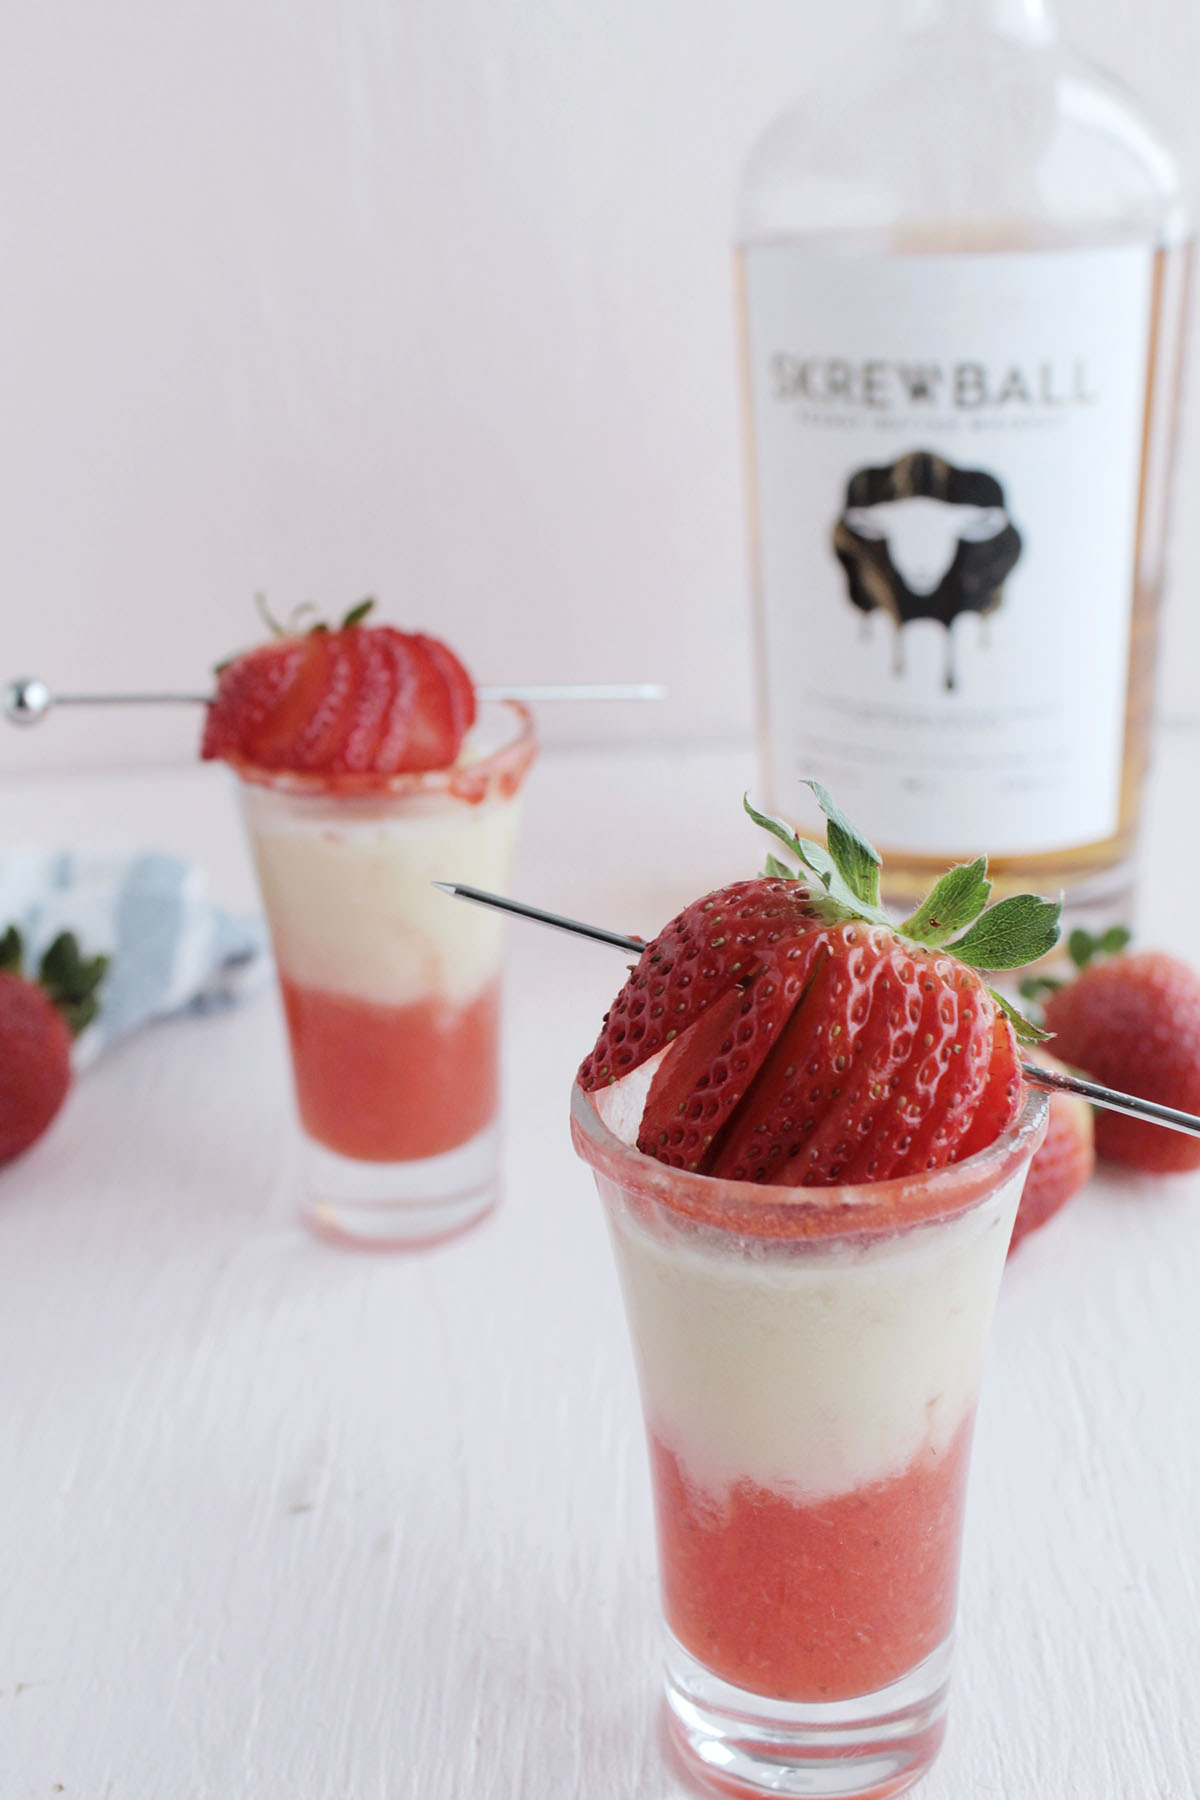 strawberry shot with peanut butter whiskey.